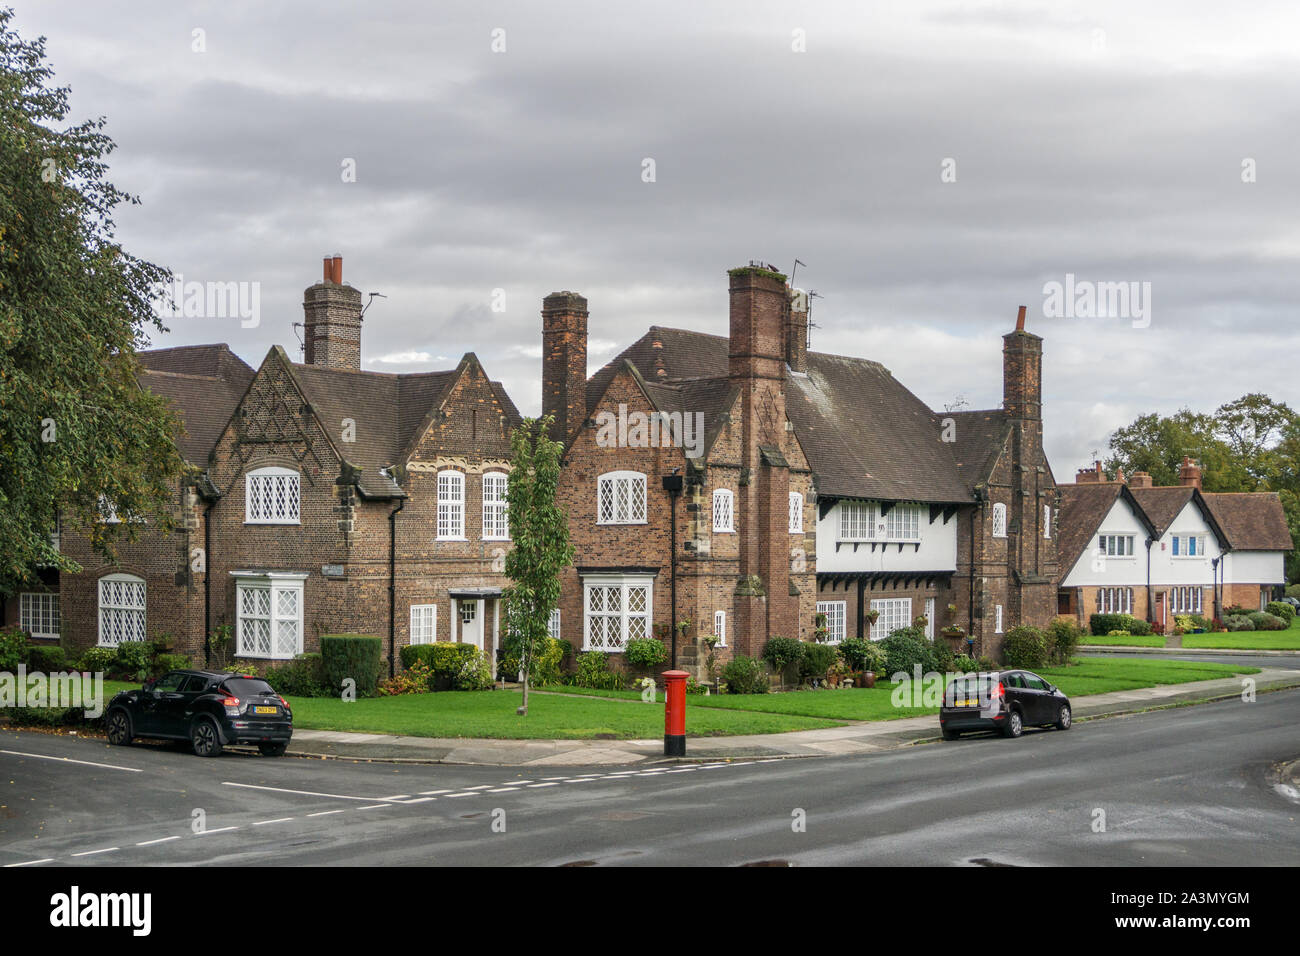 Houses in the model village of Port Sunlight, Wirral, Merseyside, UK; originally built by Lever Bros for their factory workers. Stock Photo